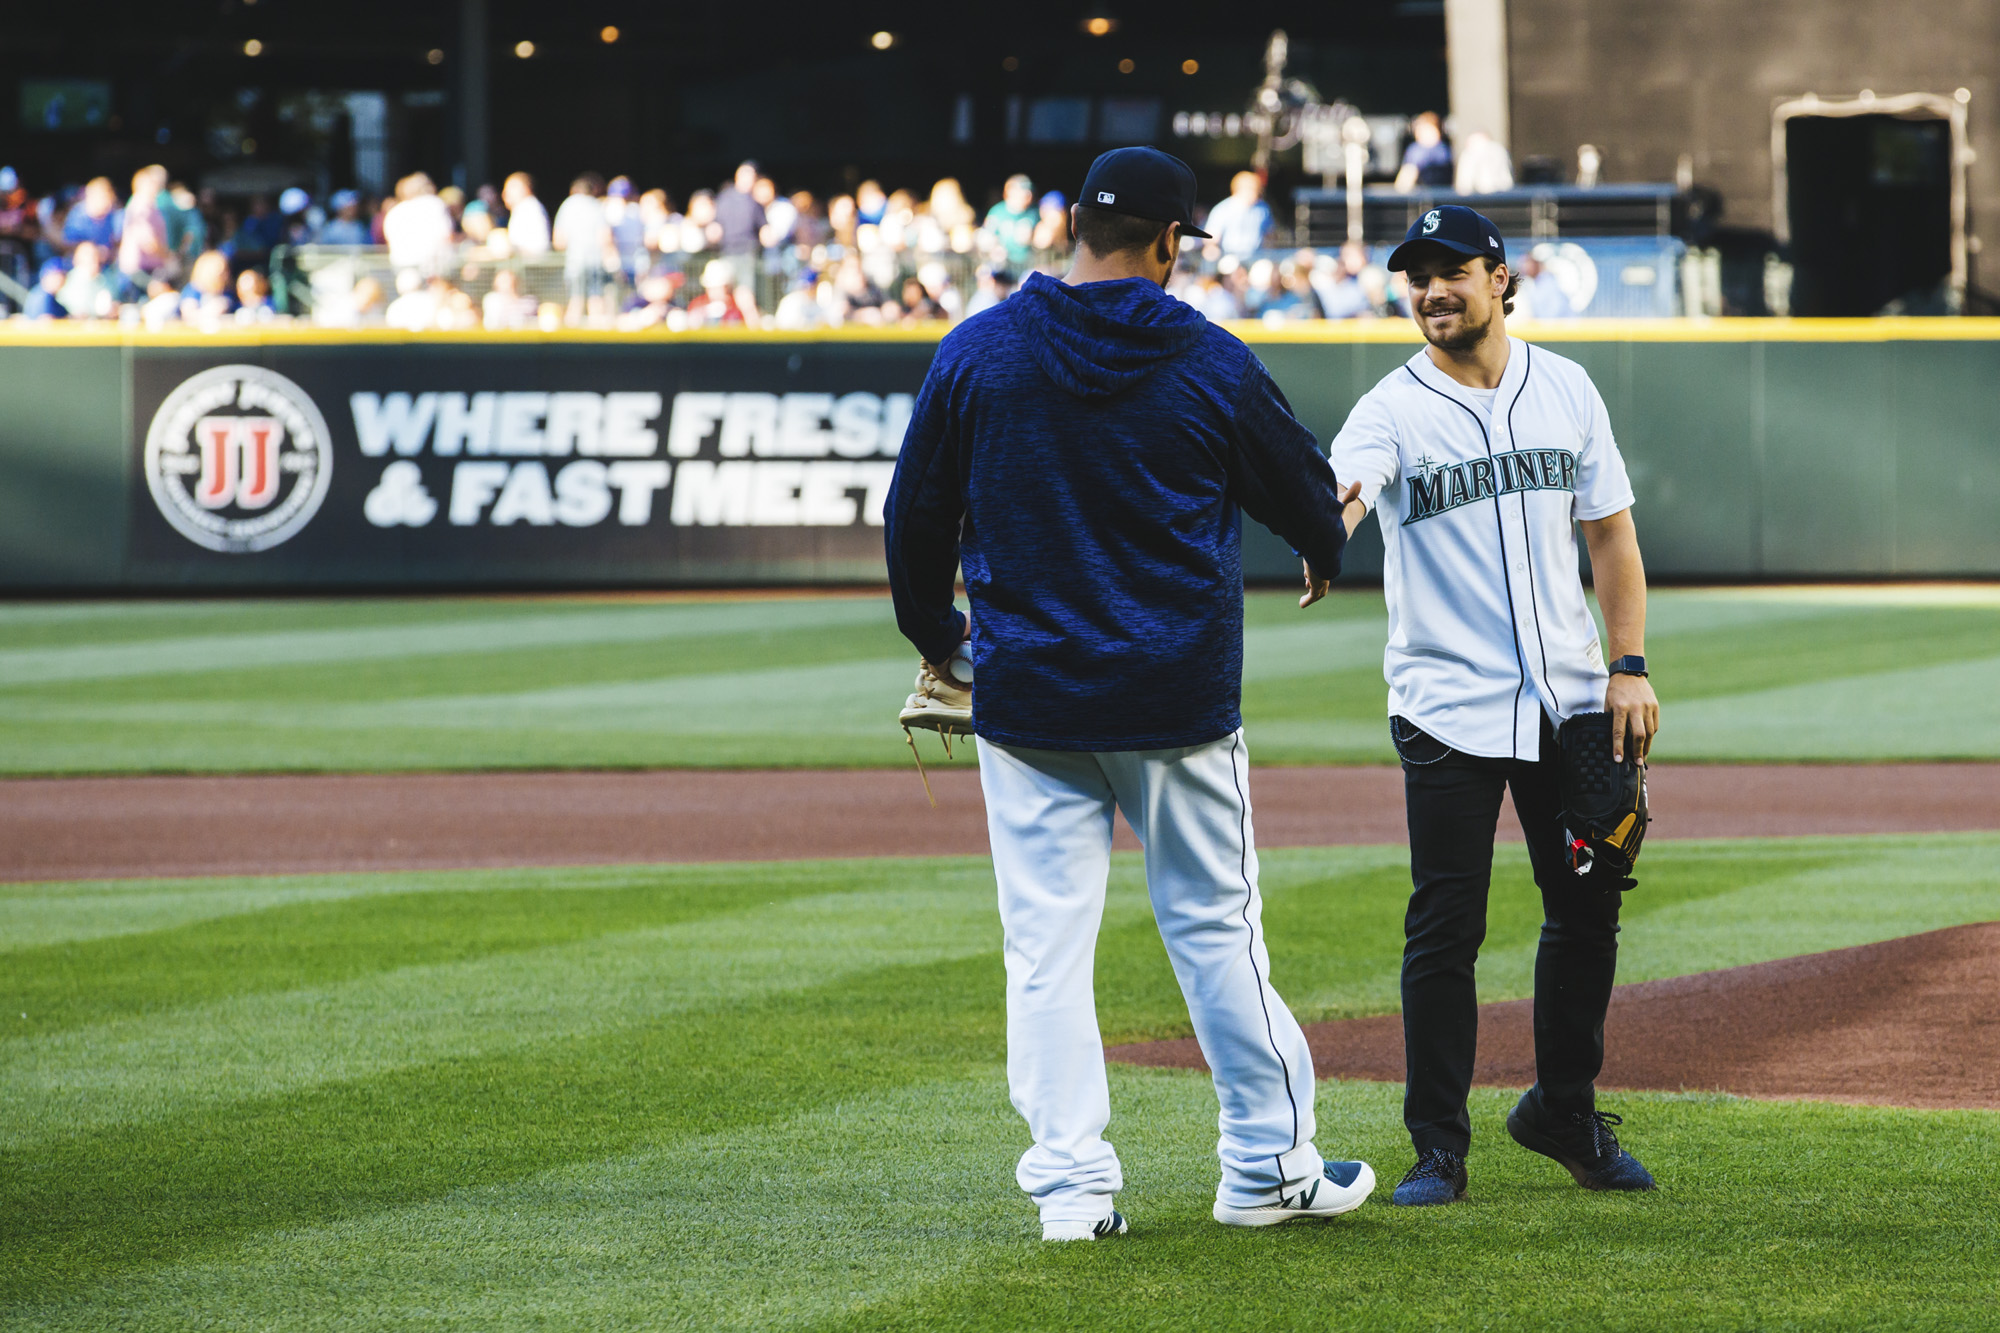 Photos: 'Grey's Anatomy' cast throw first pitch at Safeco Field | Seattle Refined